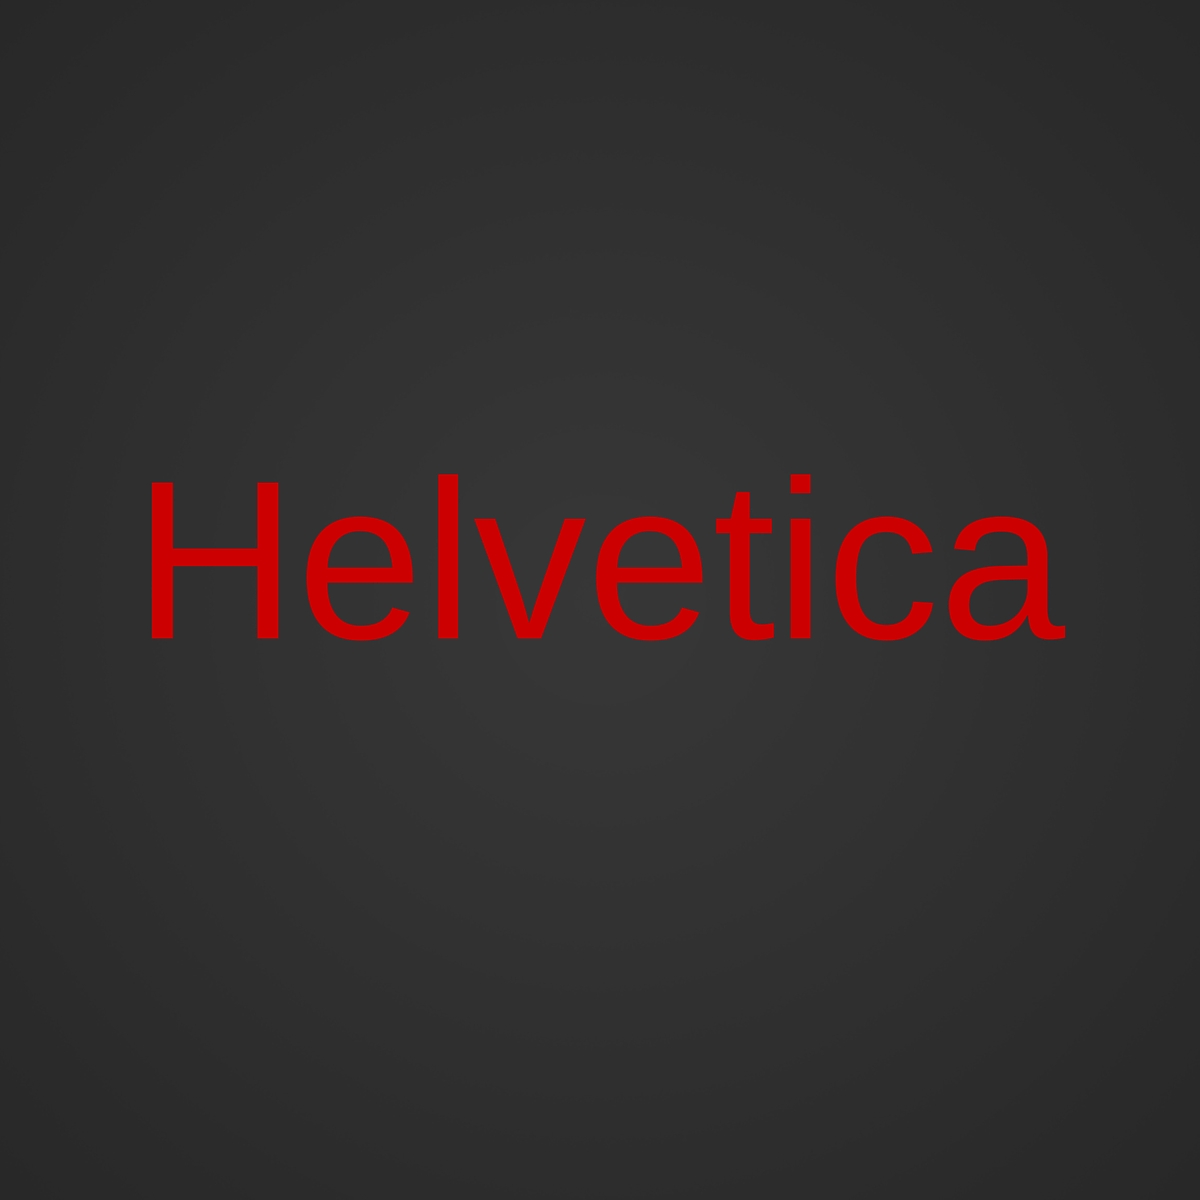 Save us from “Helvetica”